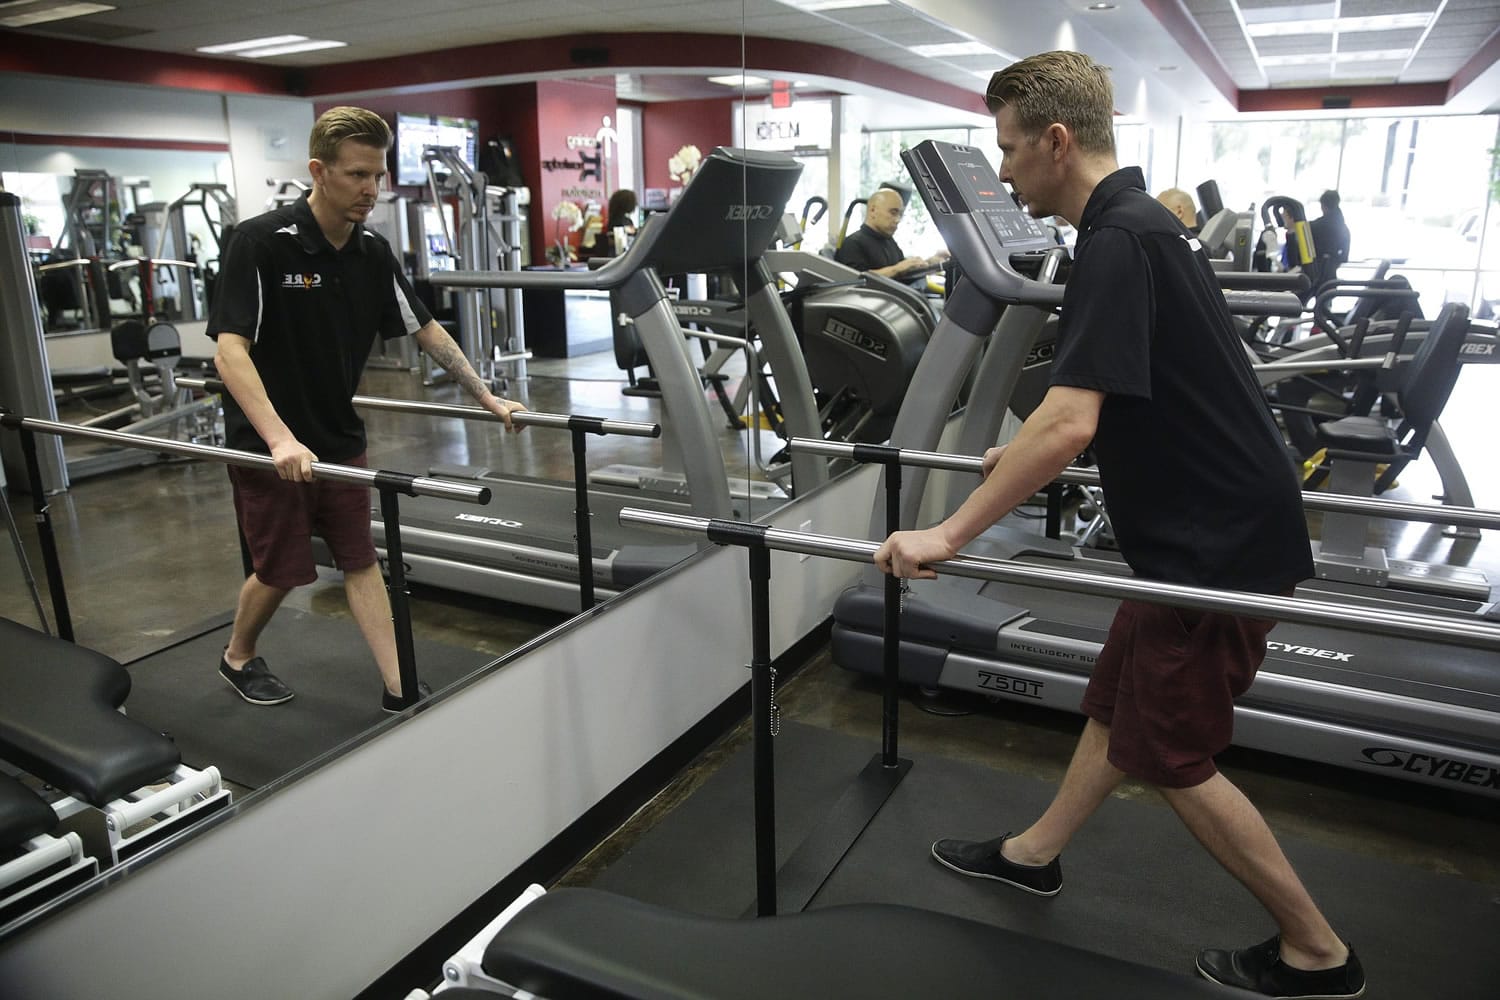 Aaron Baker, a former motocross racer who was paralyzed from the neck down in a 1999 crash, walks on a treadmill May 5 at the Center of Restorative Exercise in Los Angeles.